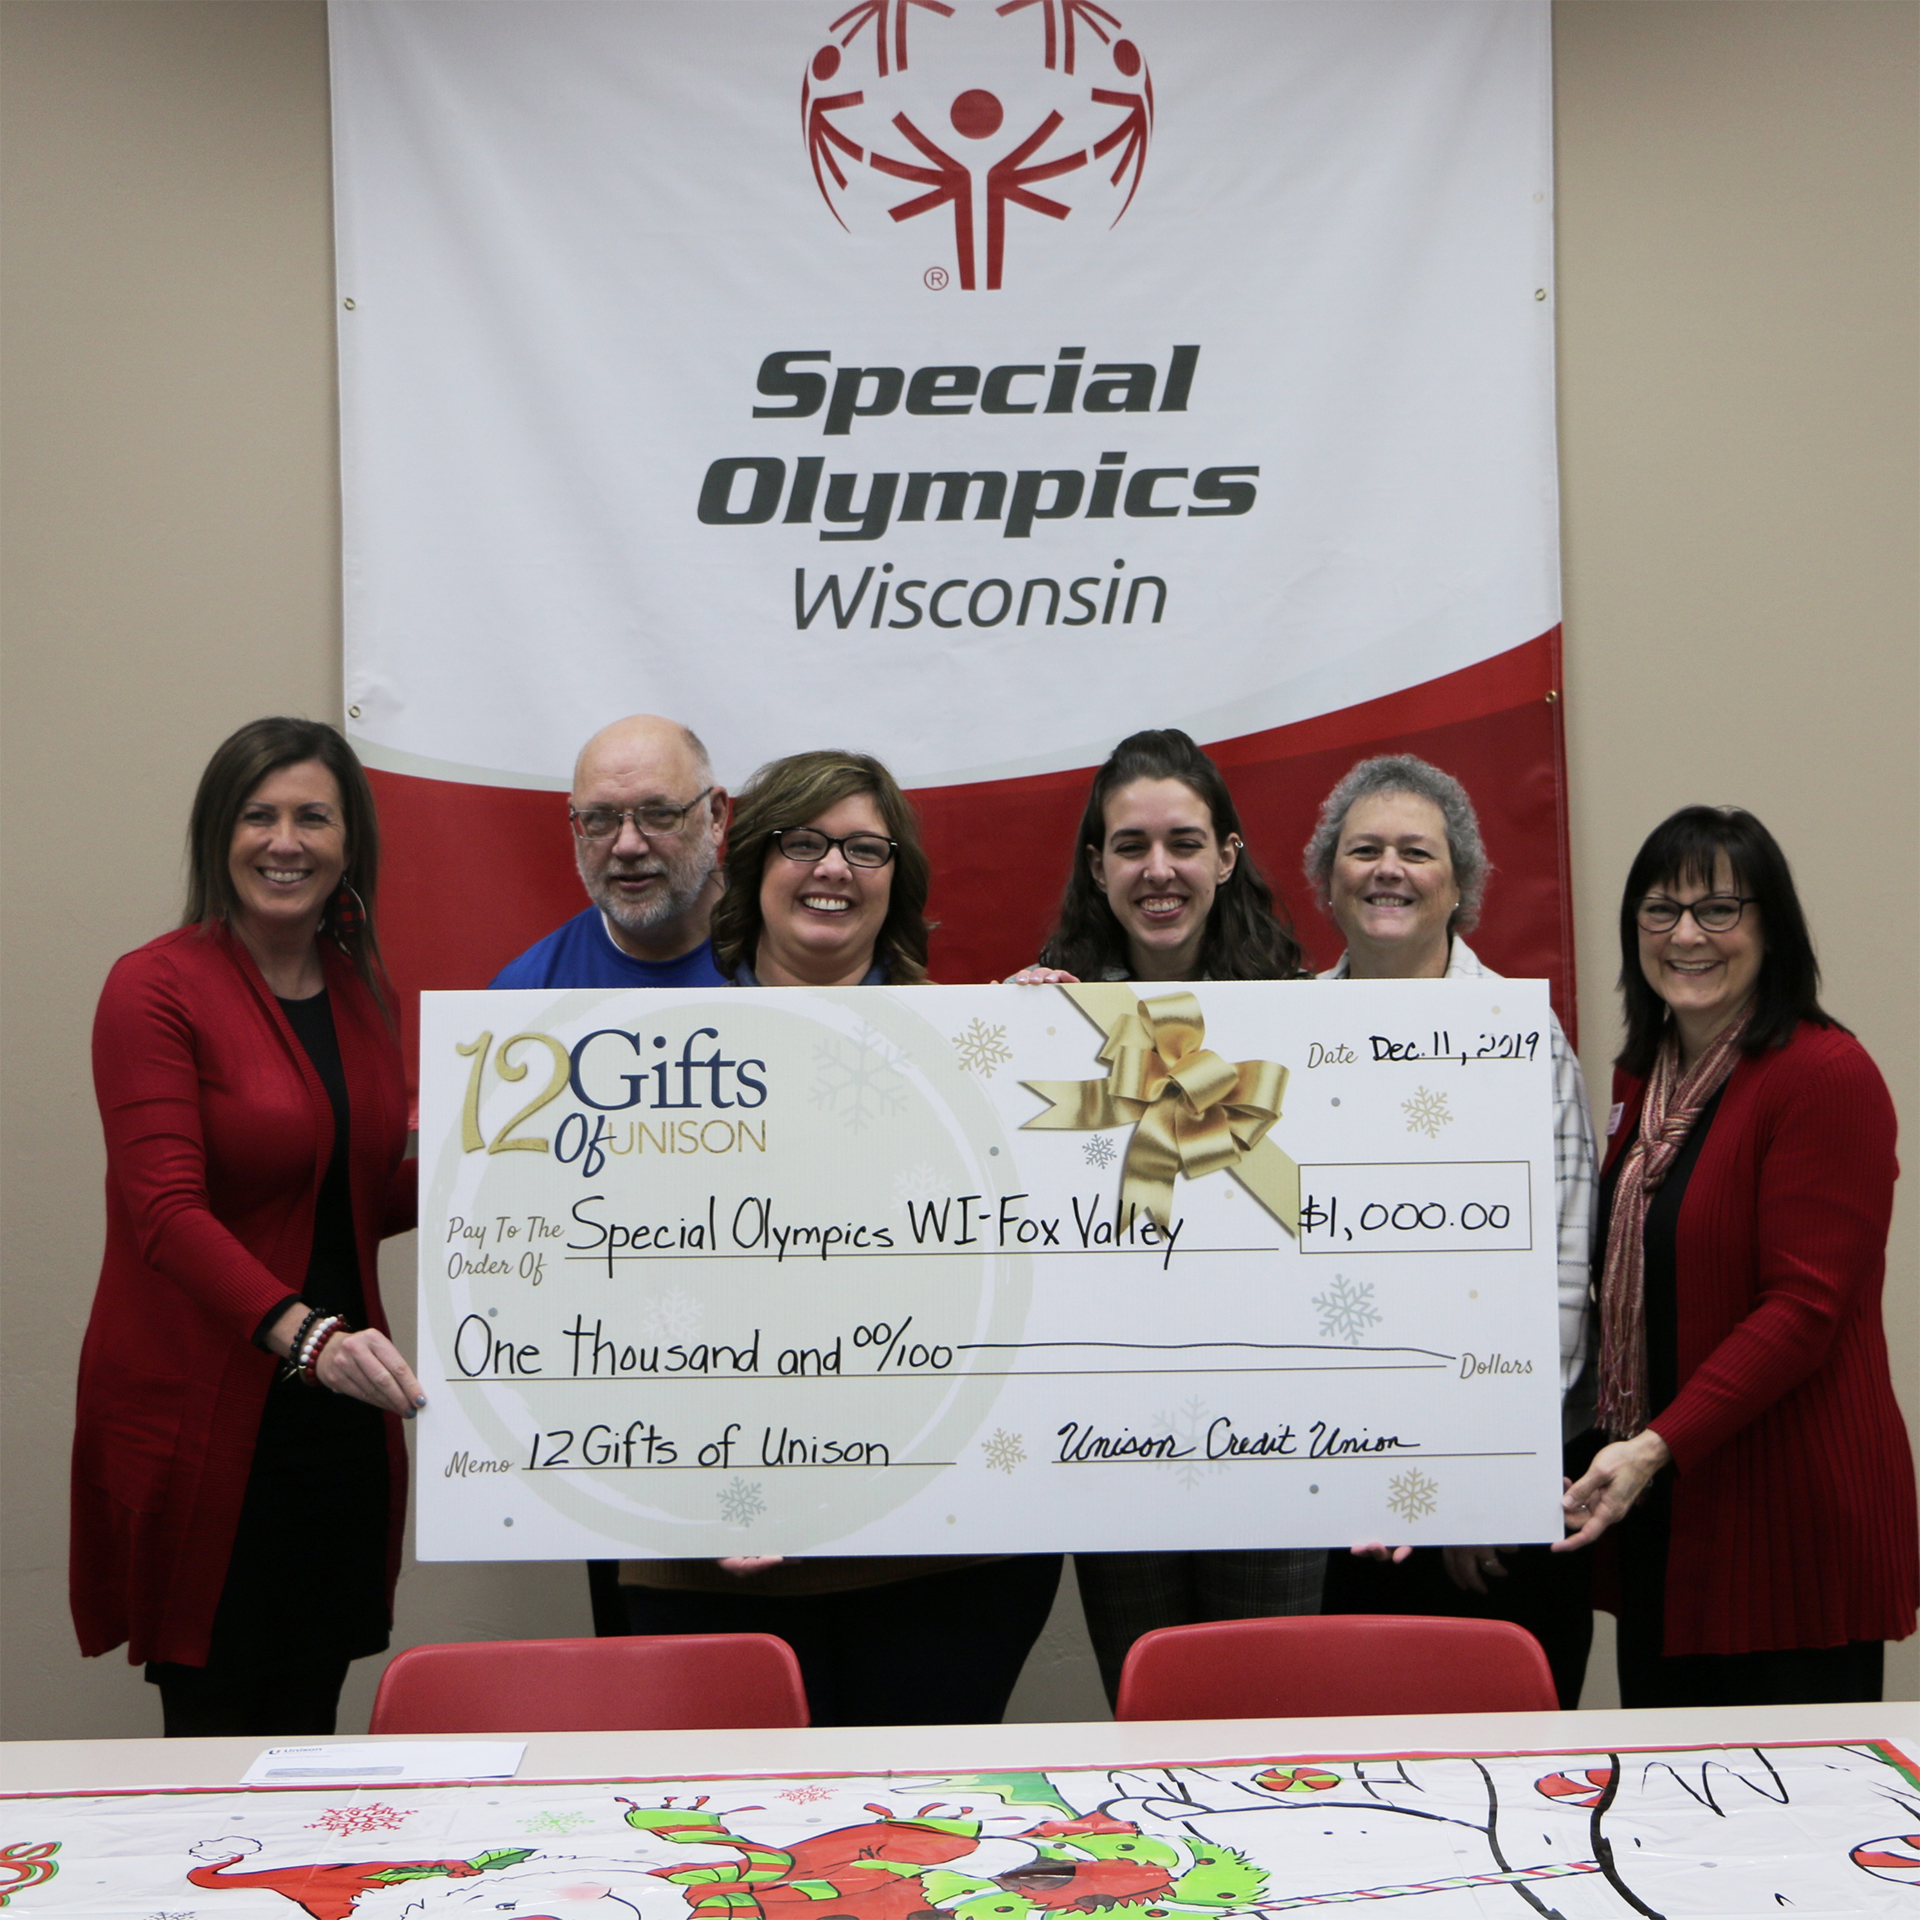 special olympics wisconsin donation from unison